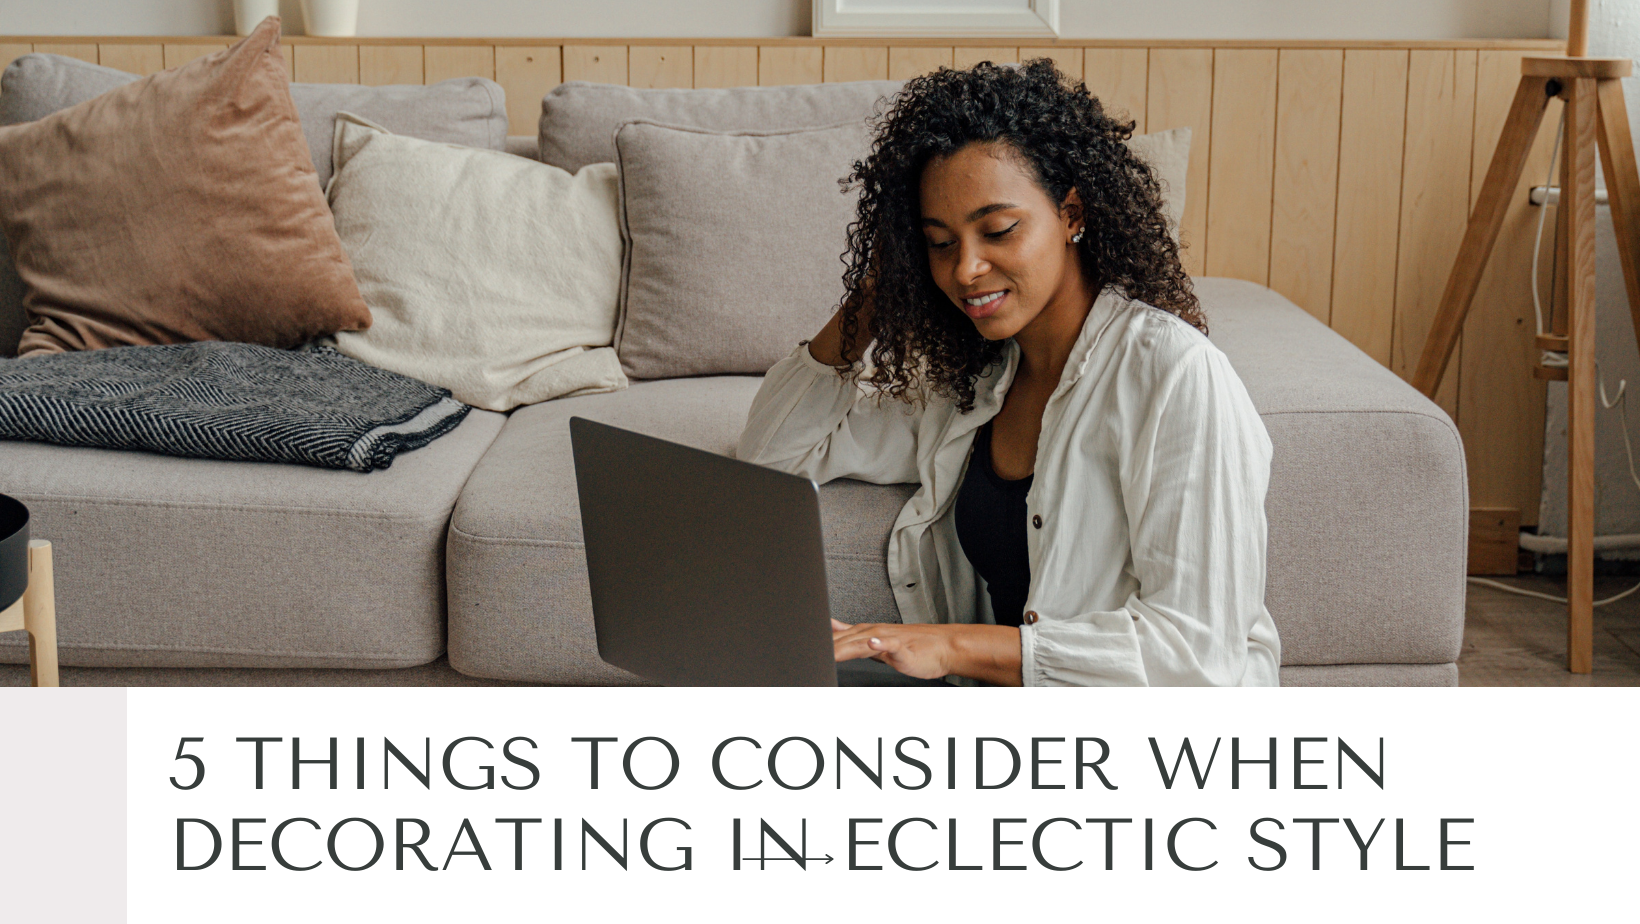 5 Things to Consider When Decorating in Eclectic Style